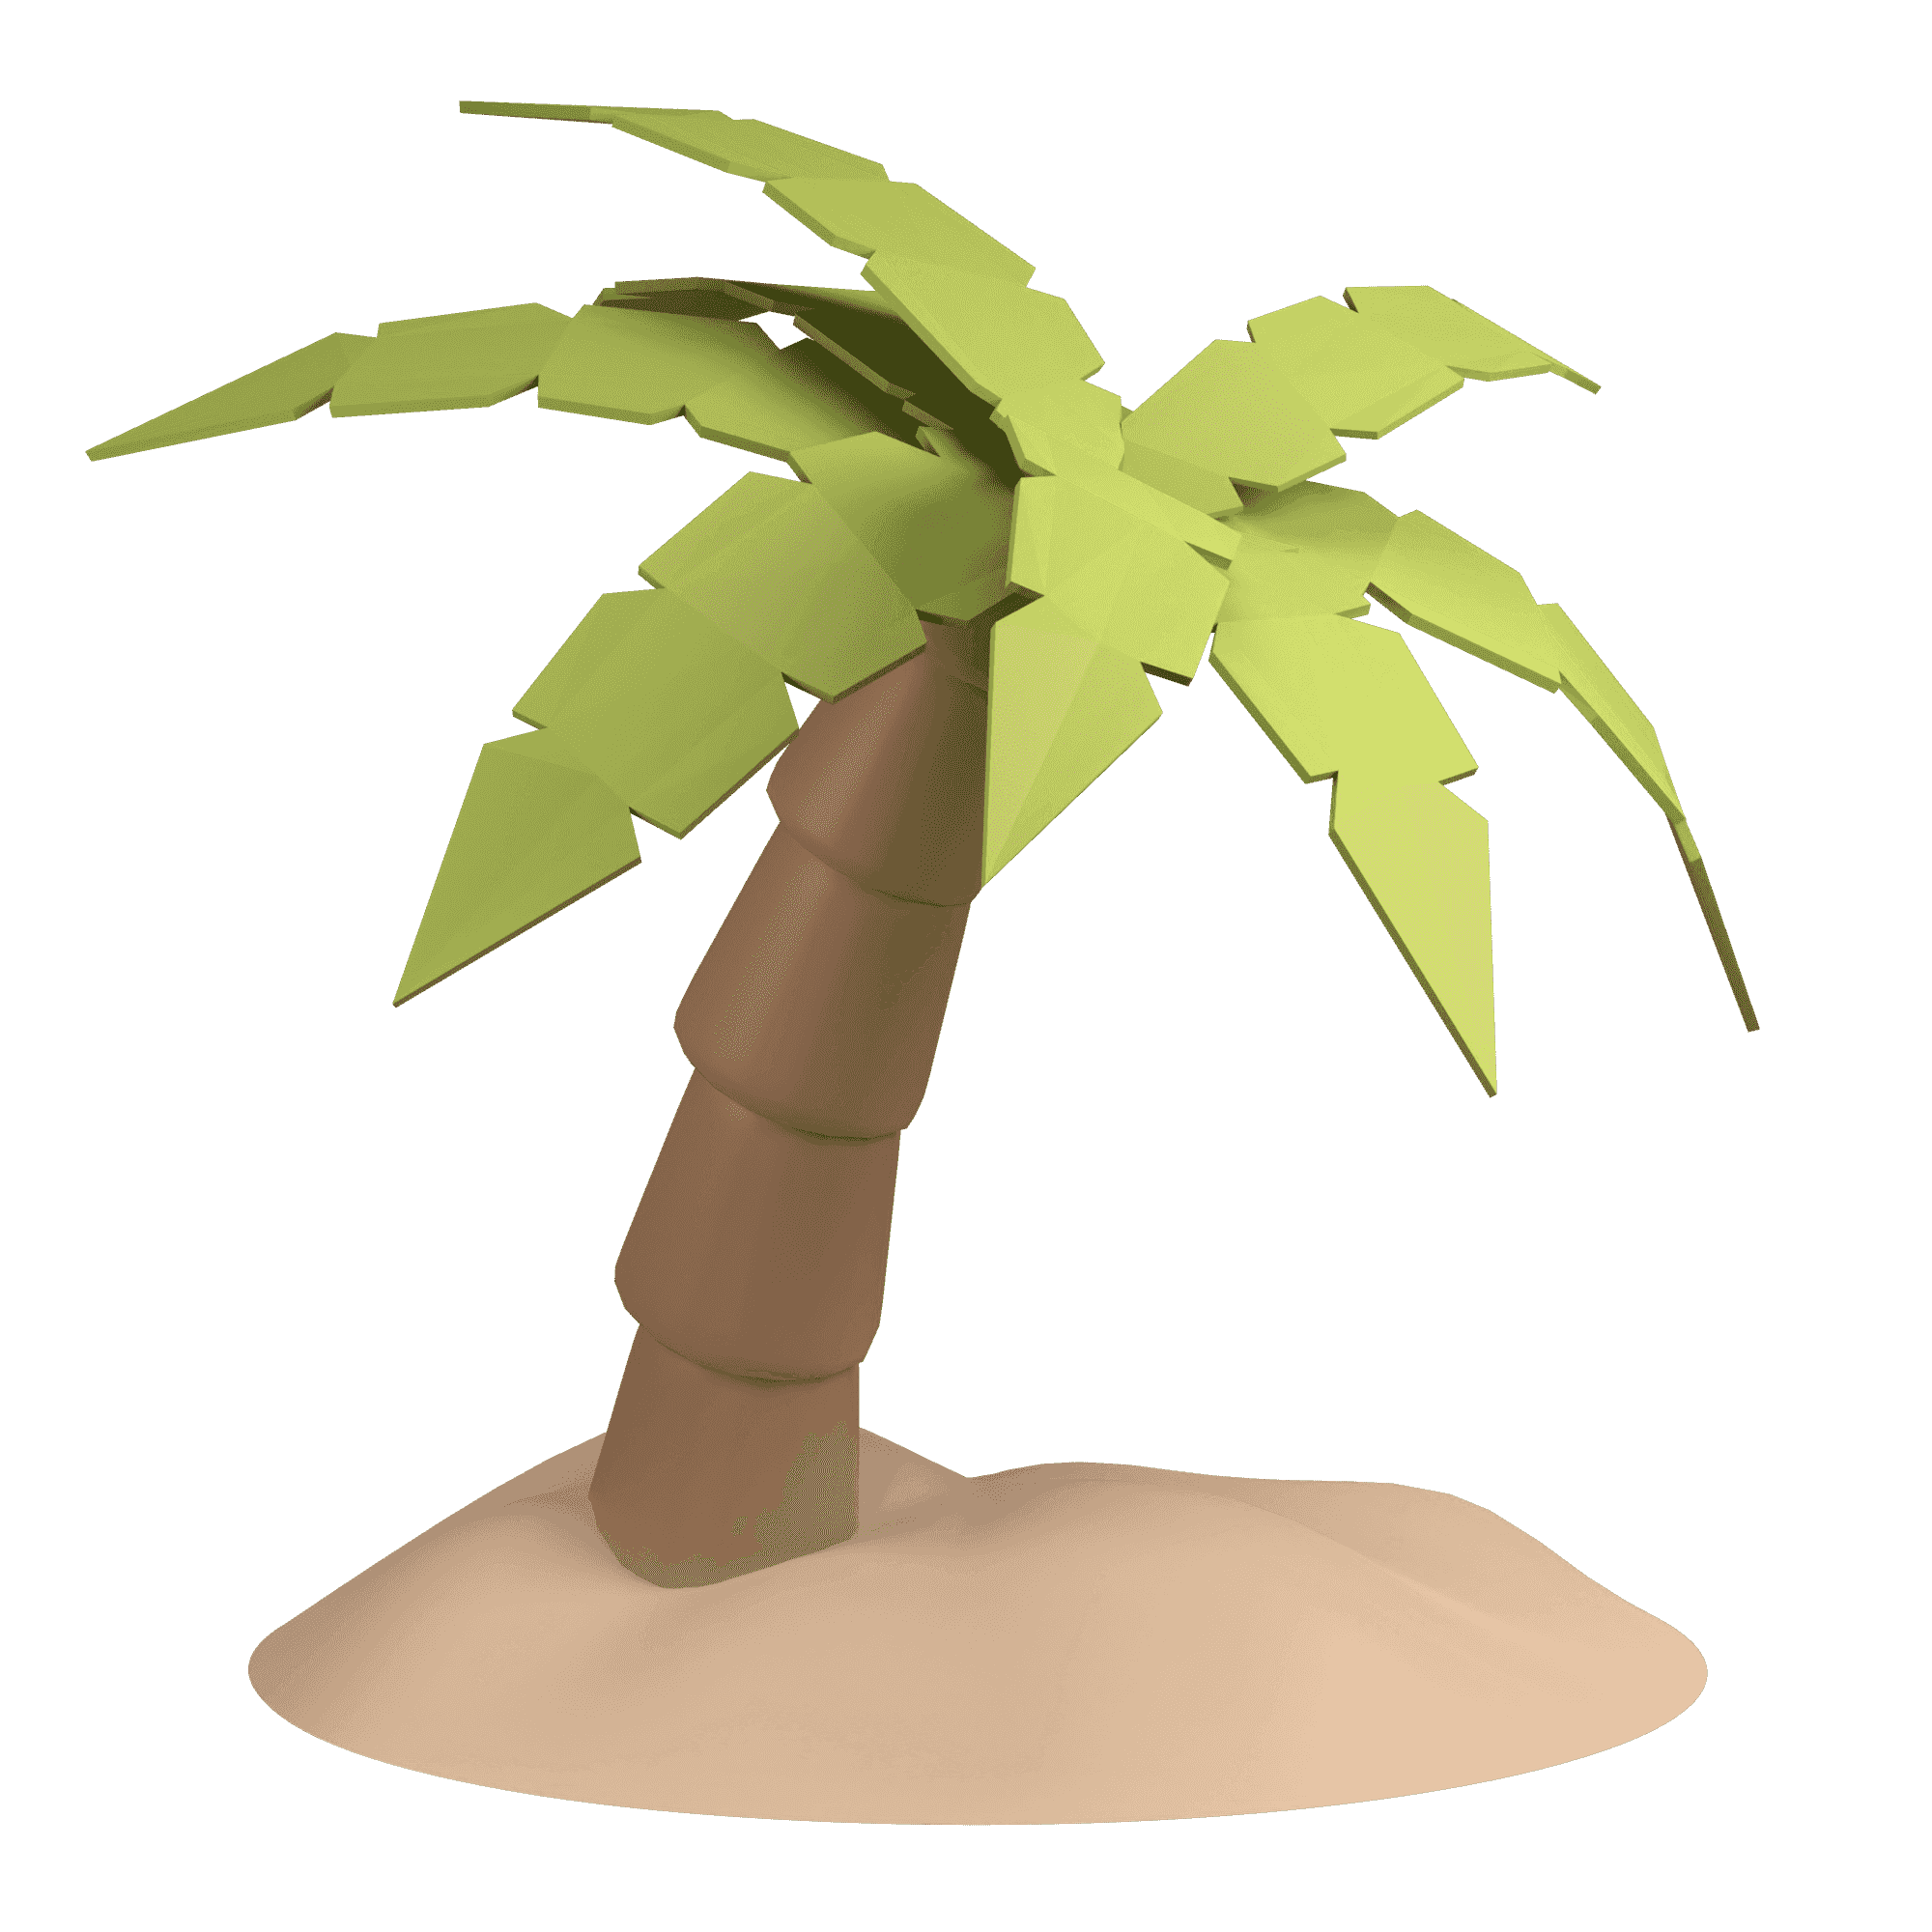 Palm tree 3D Illustration by Zulfa Mahendra from Iconscout